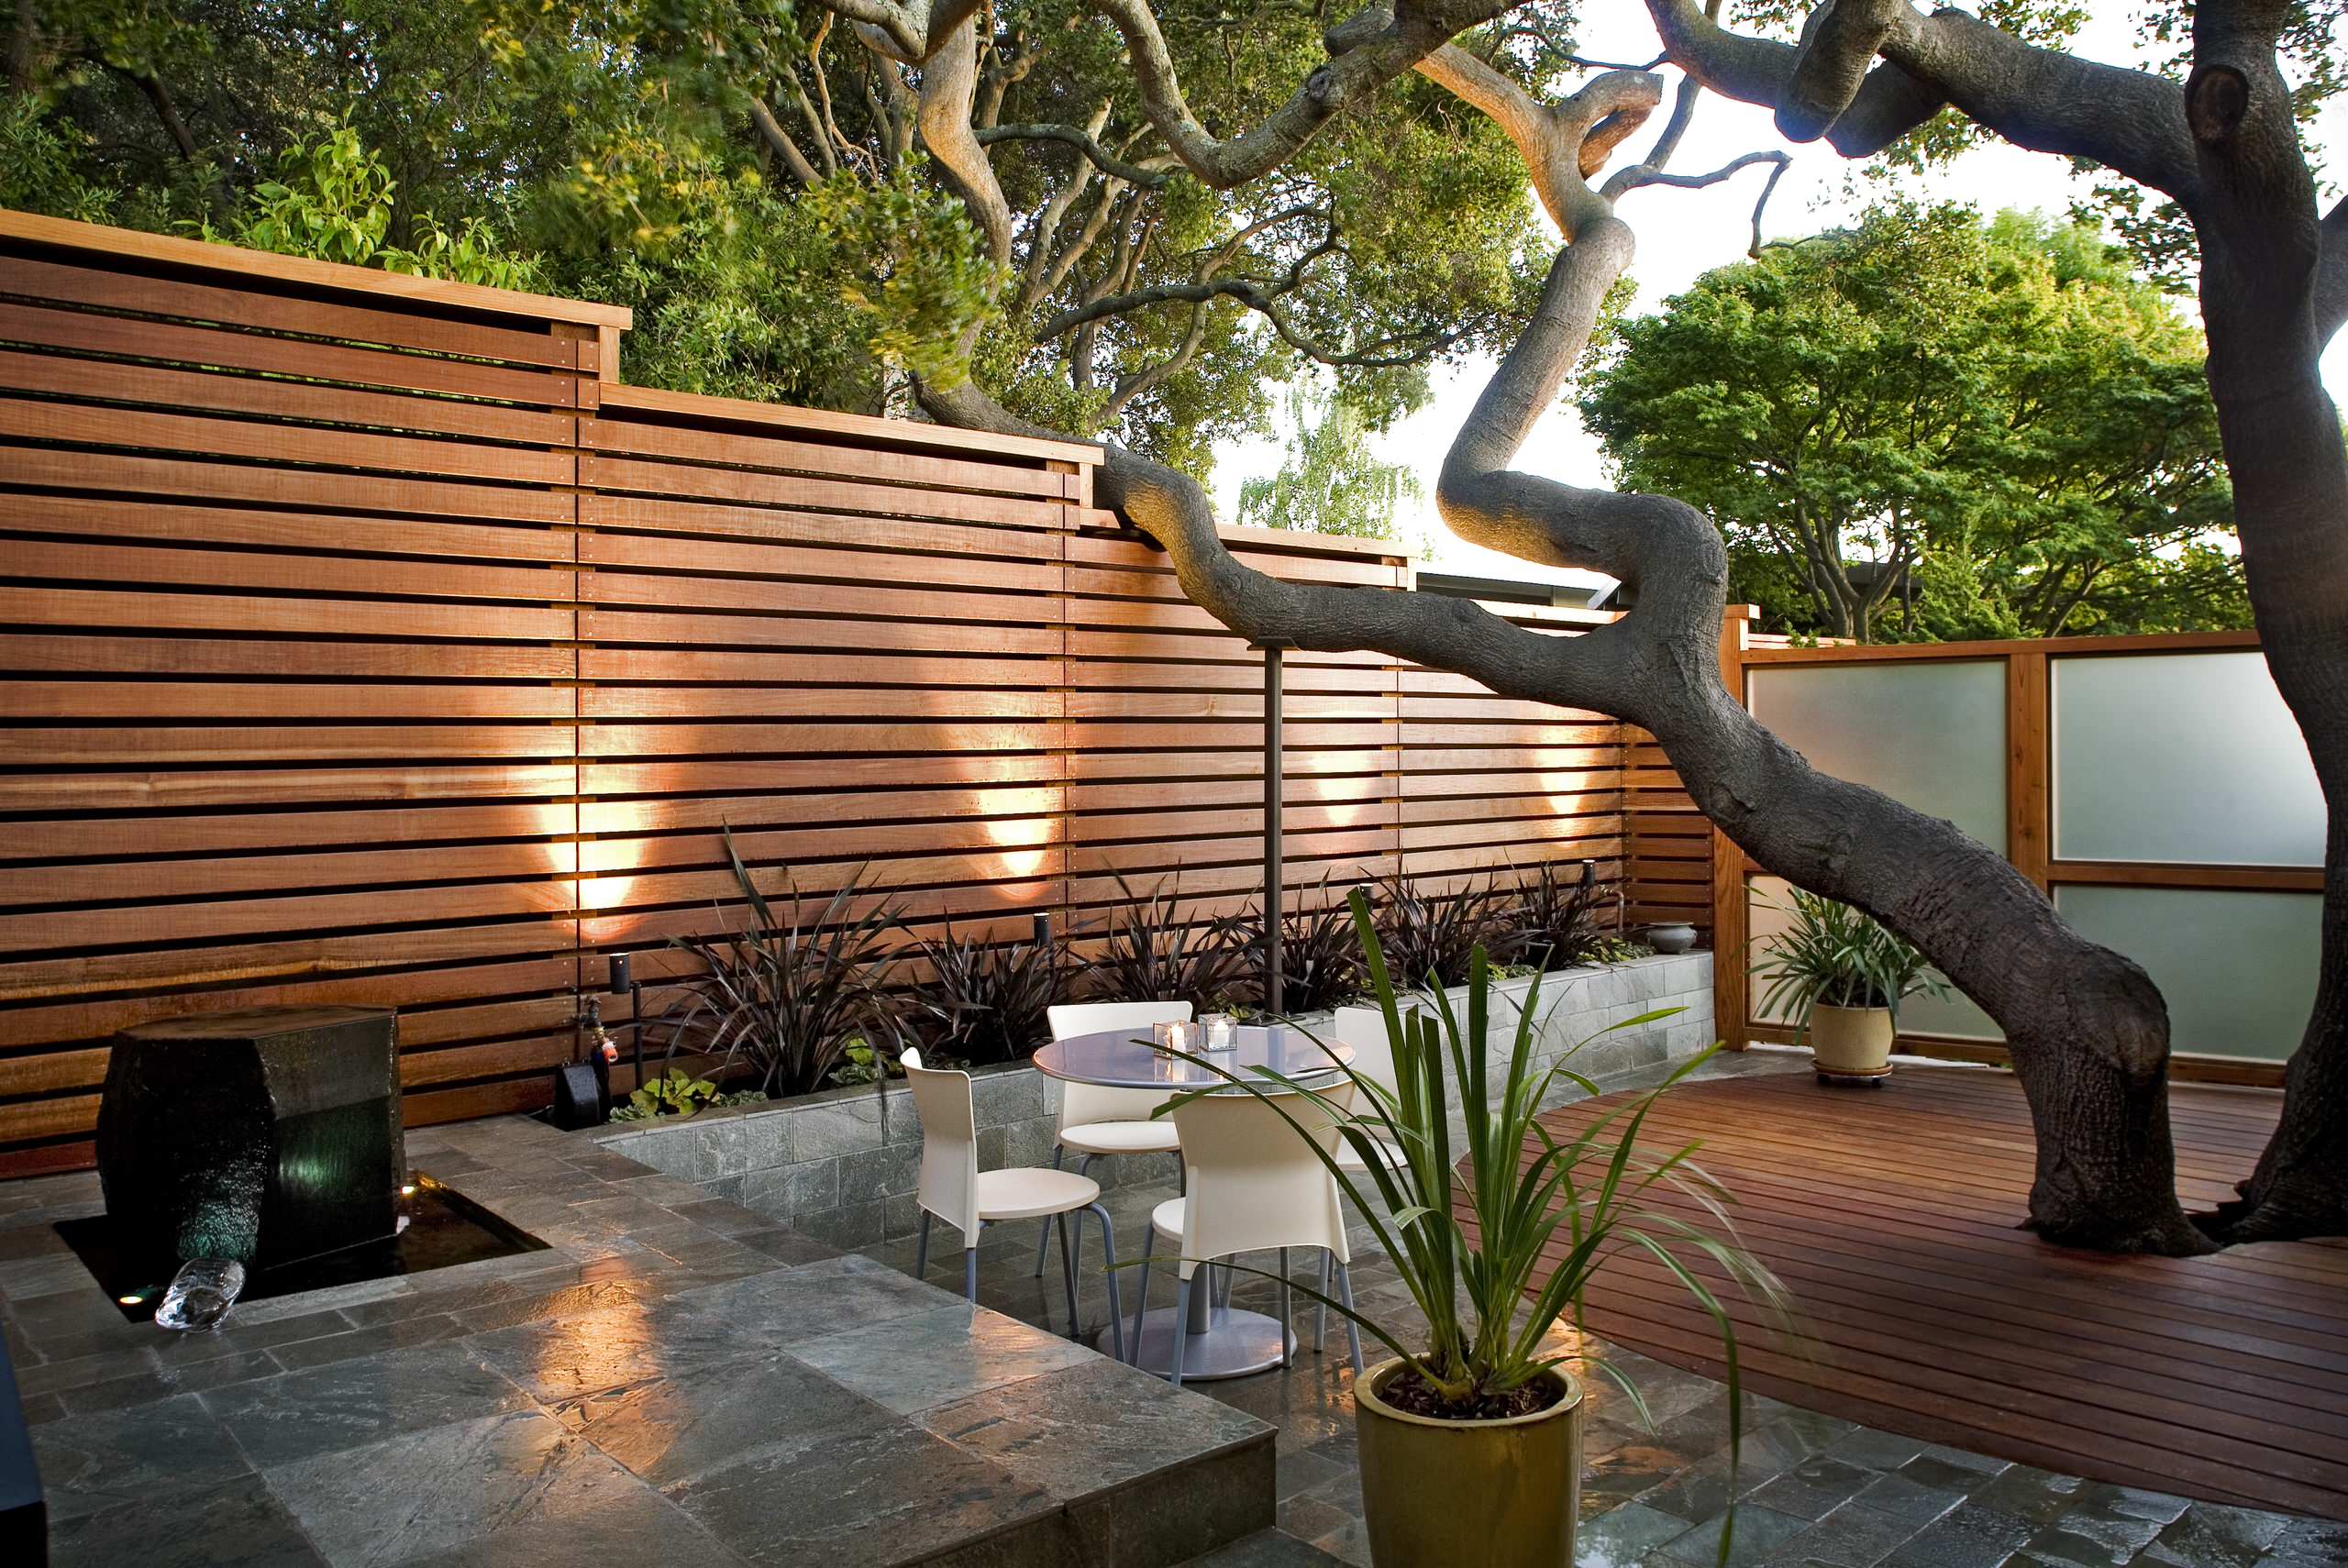 75 Beautiful Courtyard Patio Pictures Ideas April 2021 Houzz